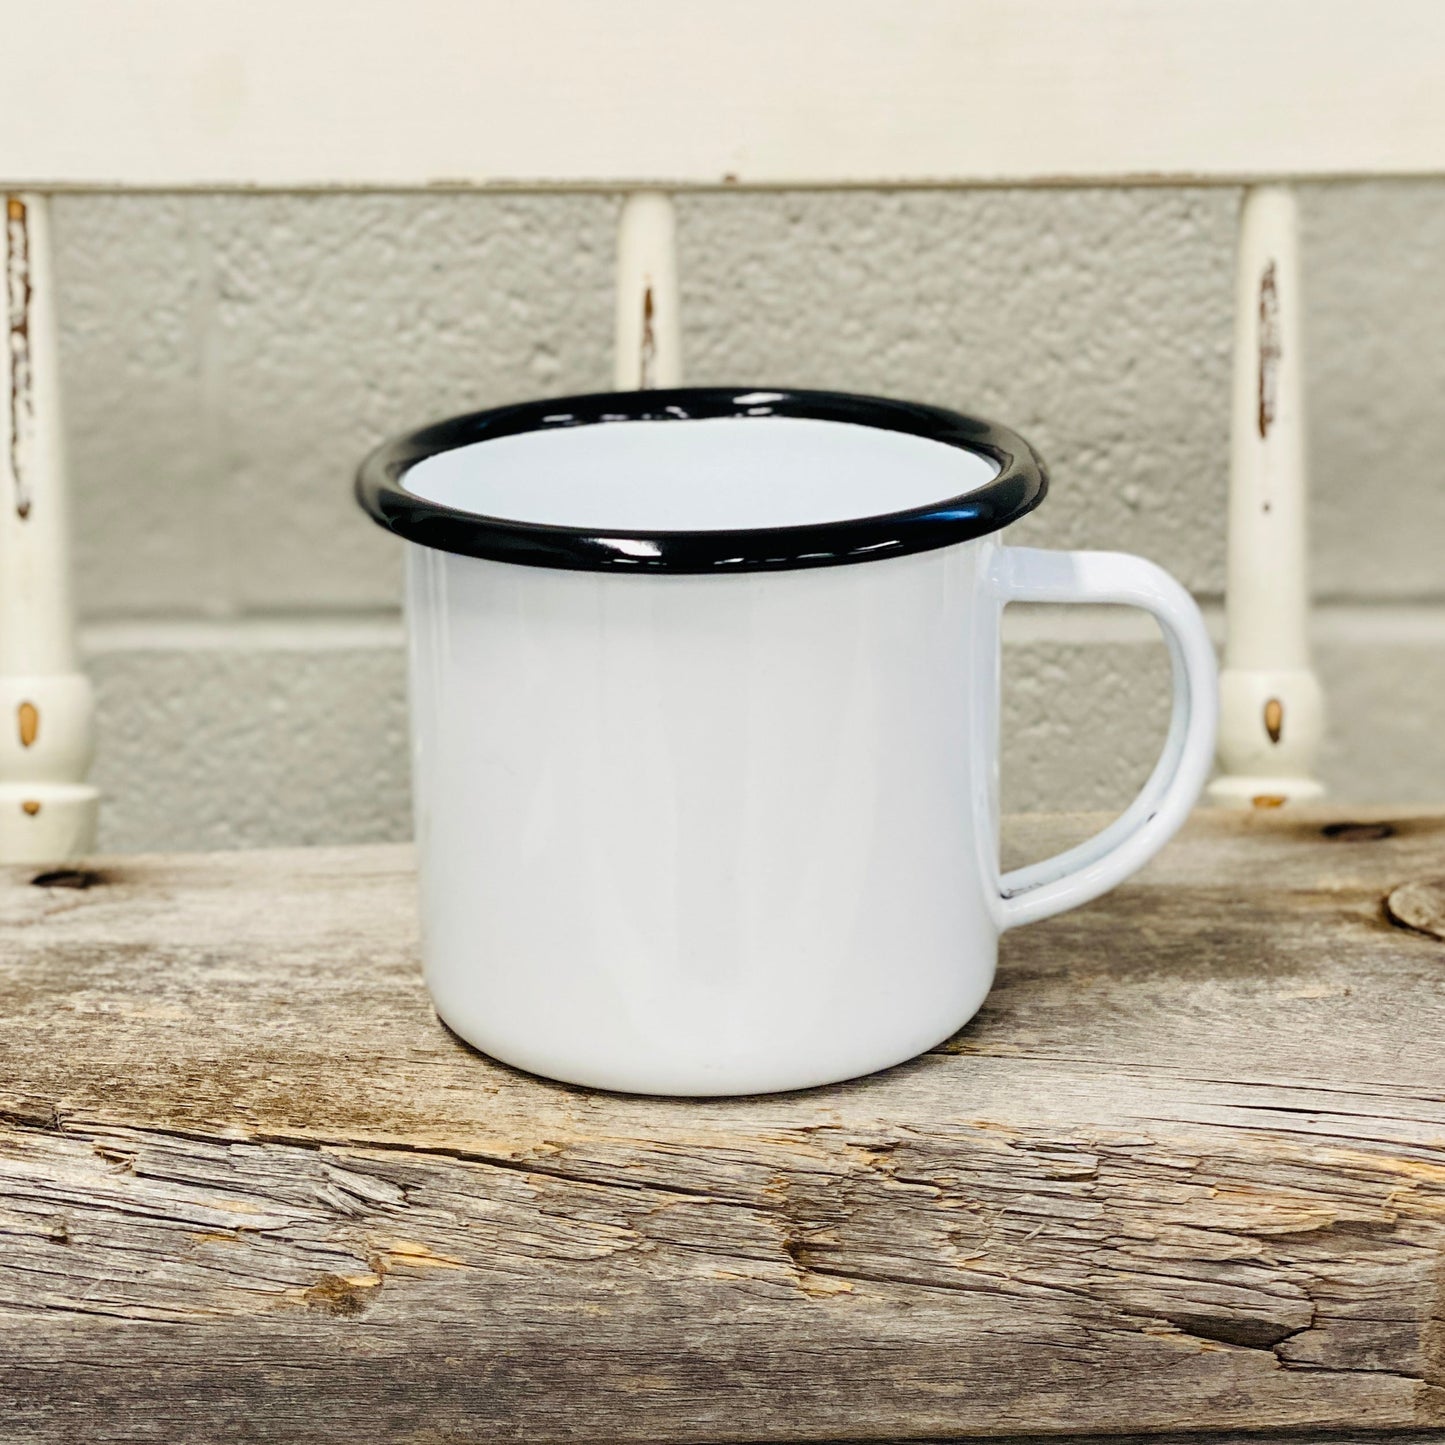 11oz Enamel Camp Mug, white with Black Rim for sublimation. These enamel mugs are a perfect combination of beautiful colors and charming vintage design. Made of stainless steel with enamel finish, they are light and durable and can make a great way to serve up your favorite drinks at home, office, or when you are traveling, camping, or hiking.